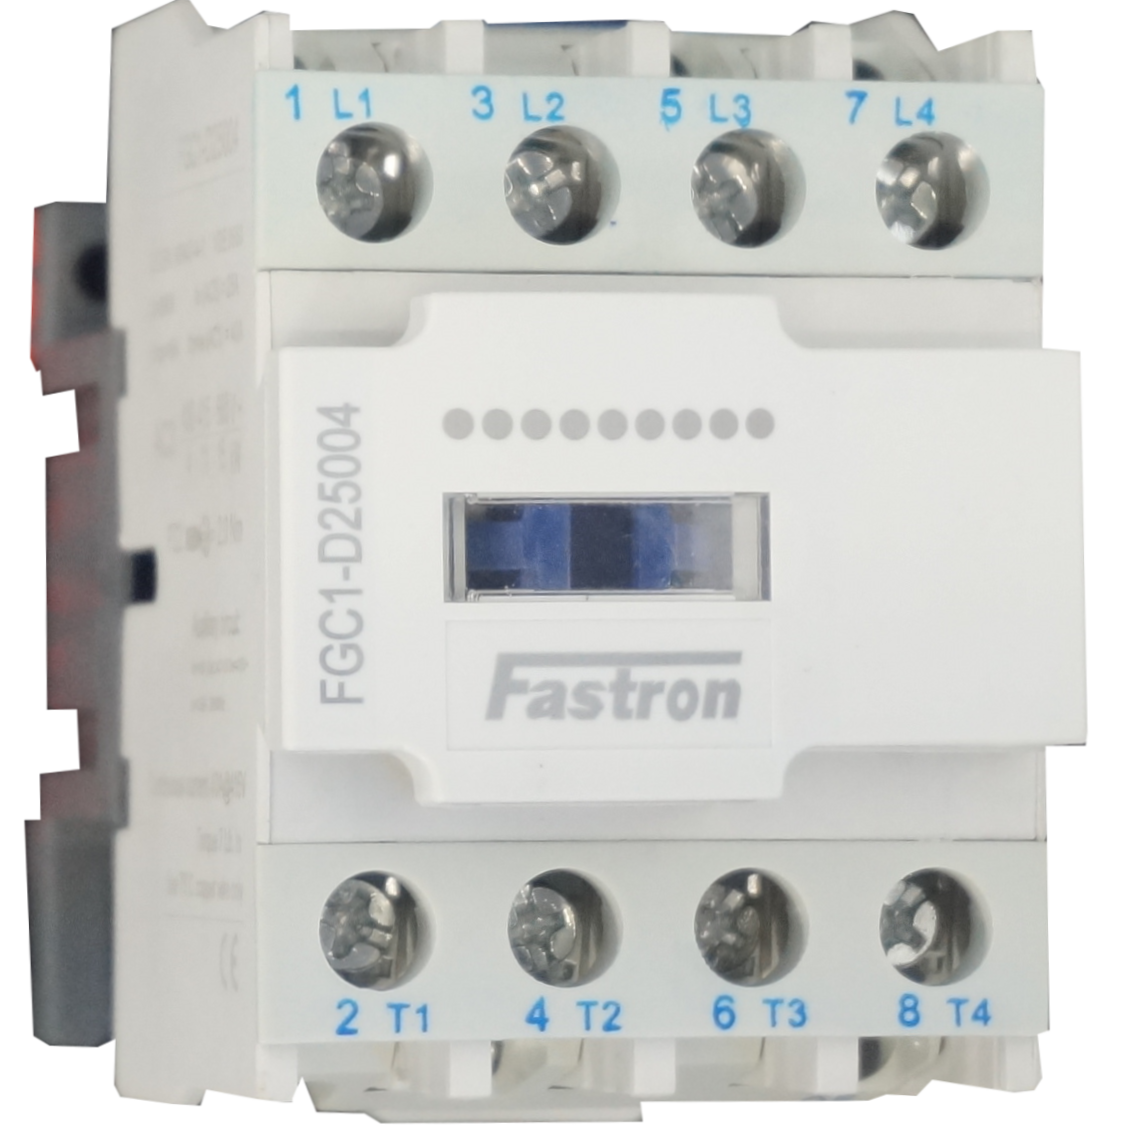 How to assess or improve premature failure of contactors